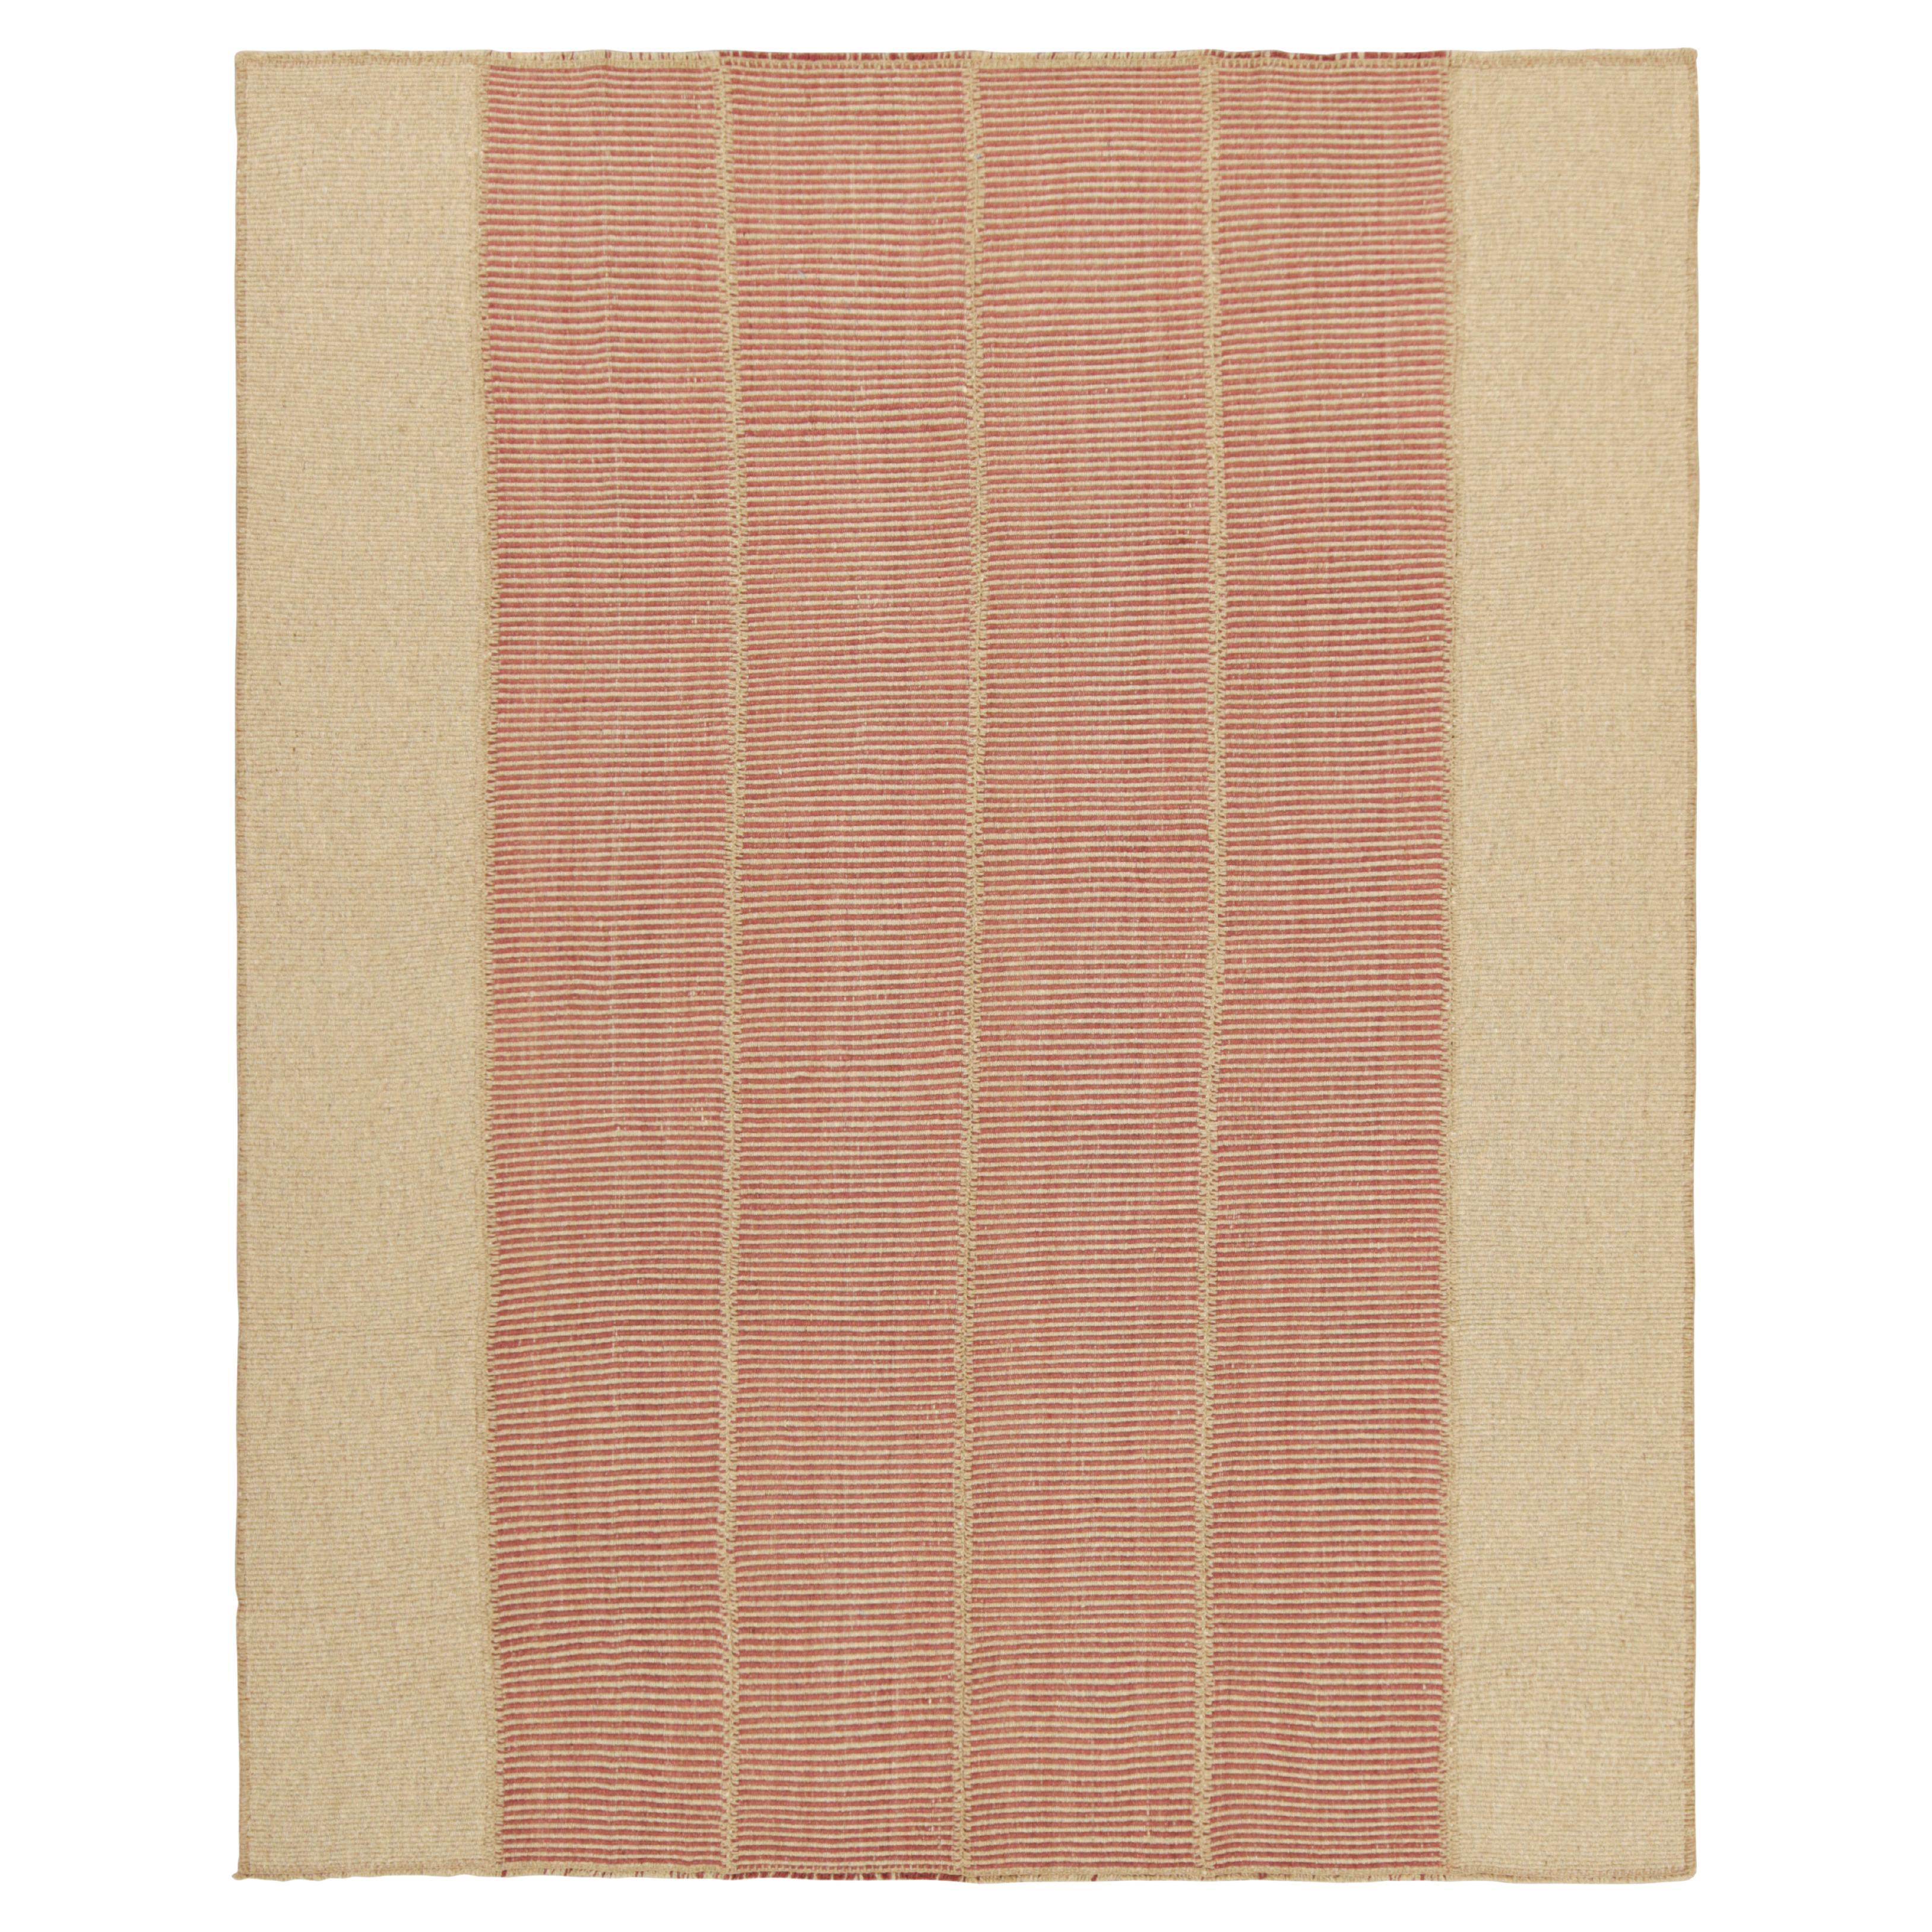 Rug & Kilim’s Contemporary Kilim in Beige and Red Textural Stripes For Sale